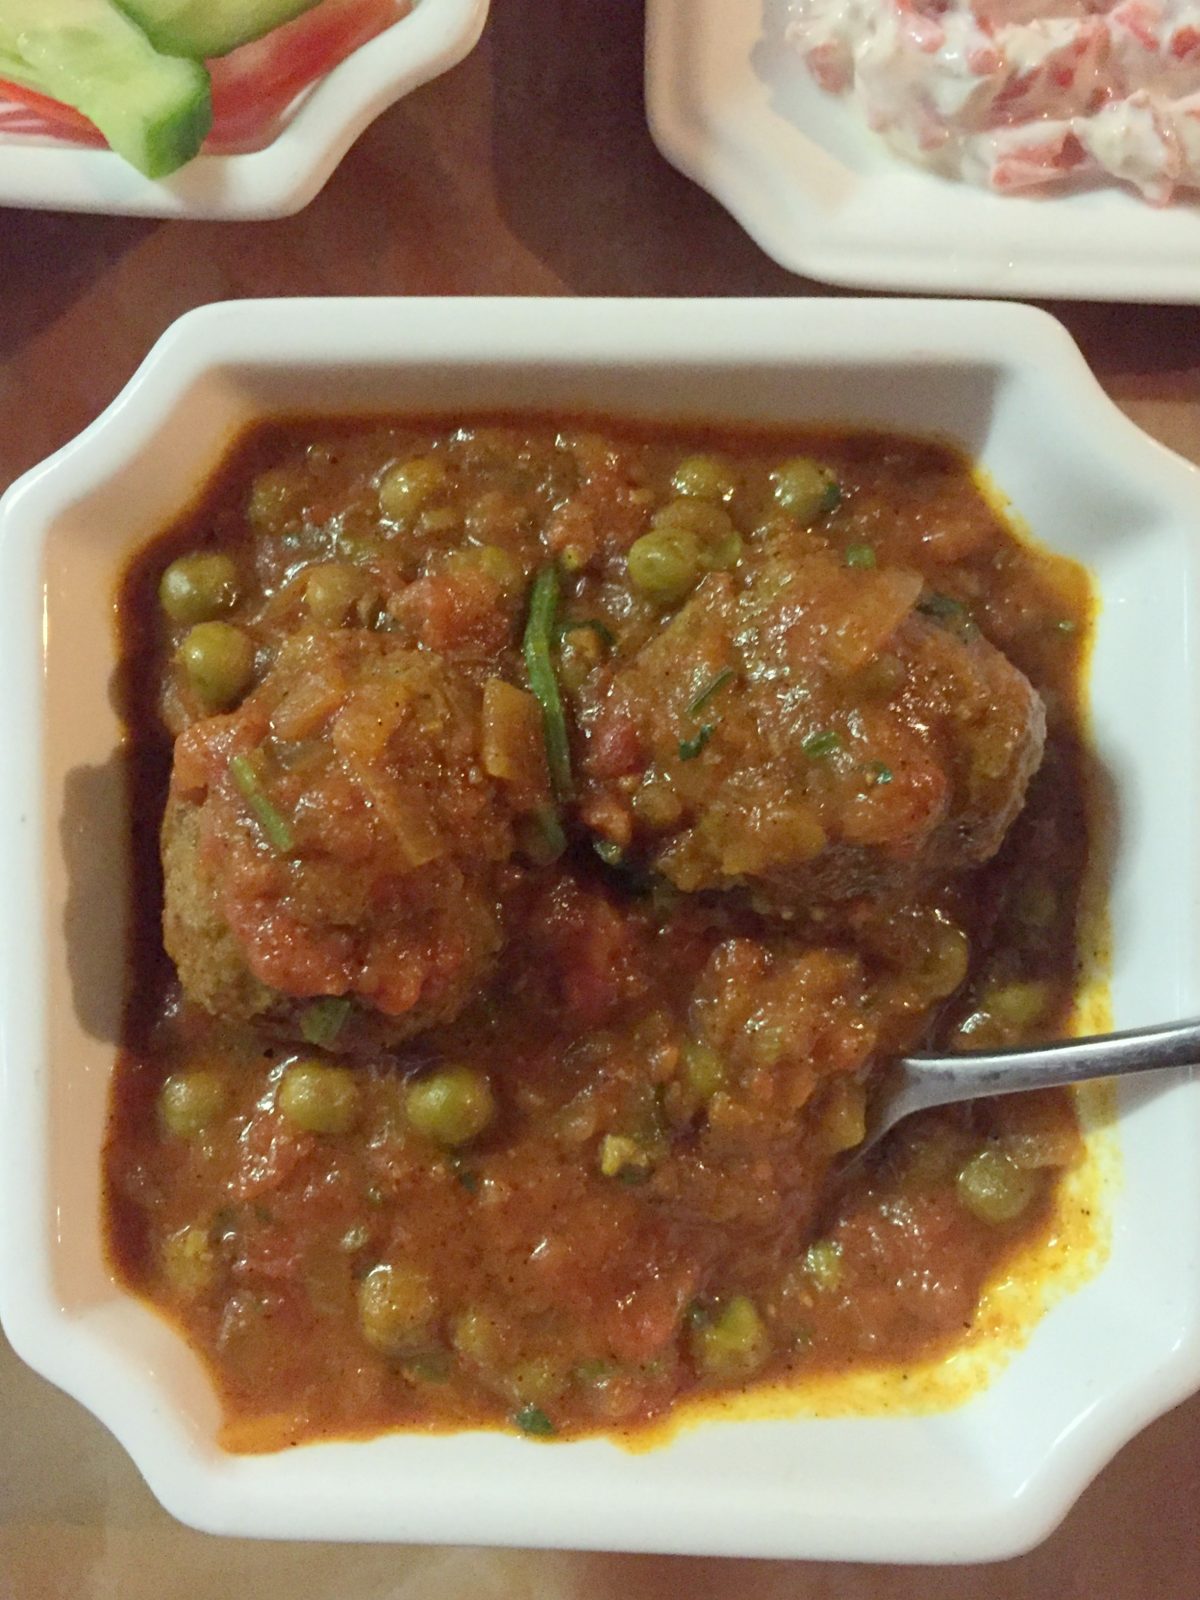 Meatball/Kofta curry (Lamb mince marinated with diced onions and herbs, curried in a delicious tomato and pea gravy)